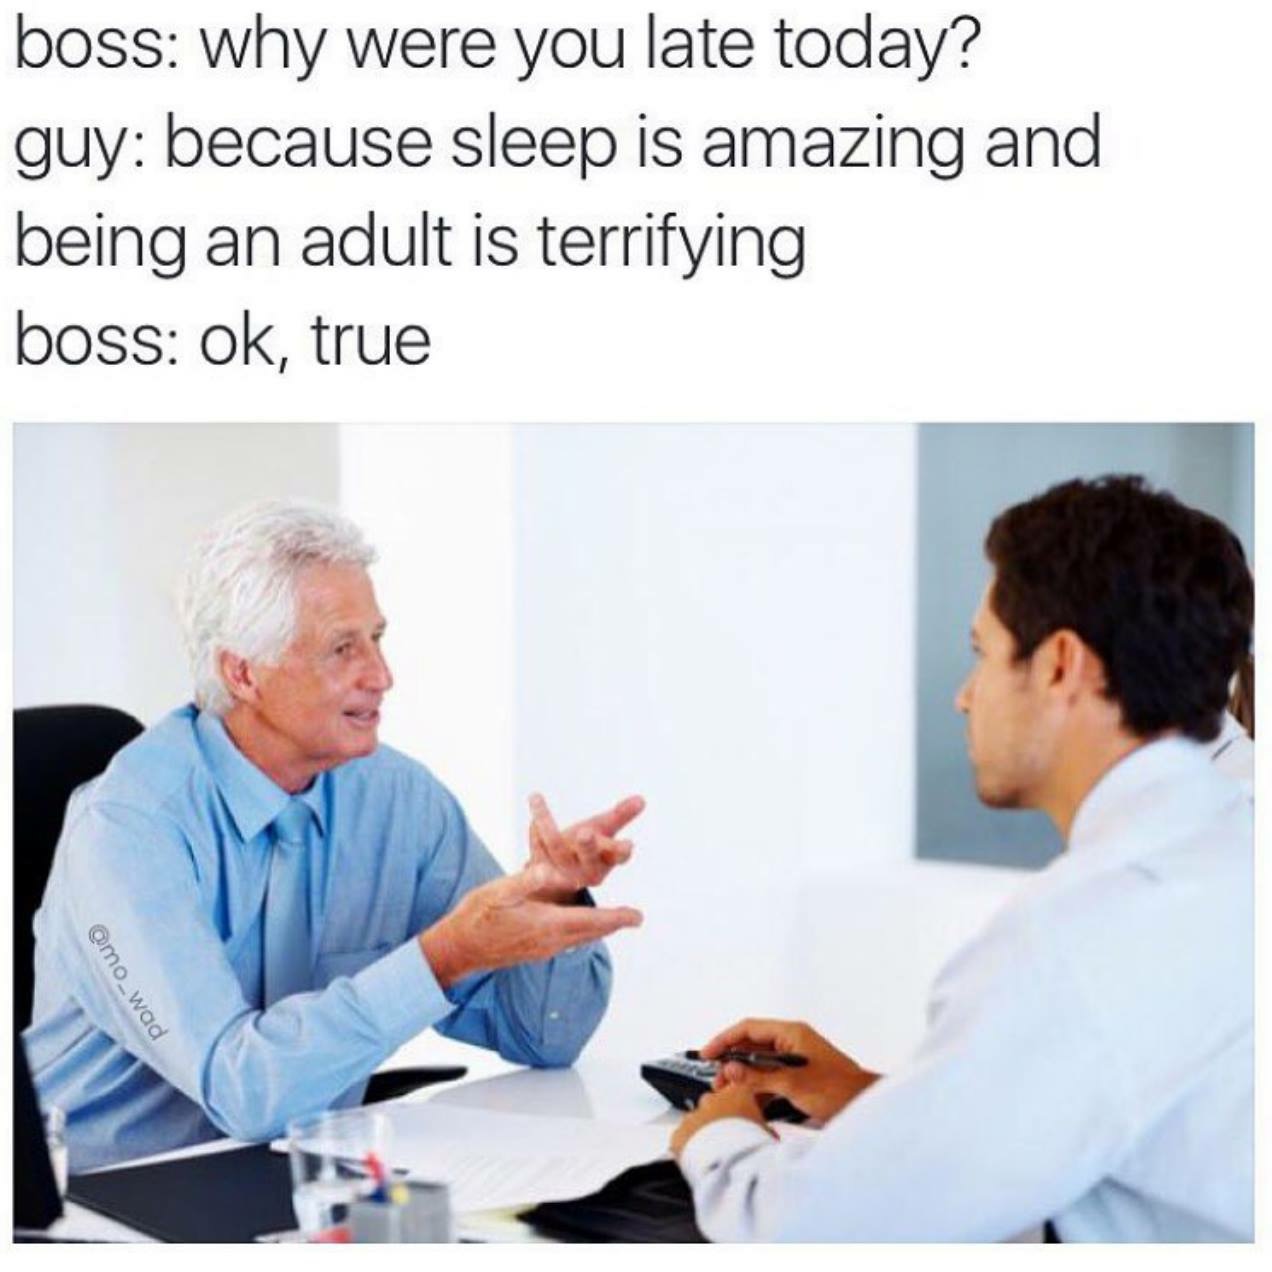 you late meme - boss why were you late today? guy because sleep is amazing and being an adult is terrifying boss ok, true